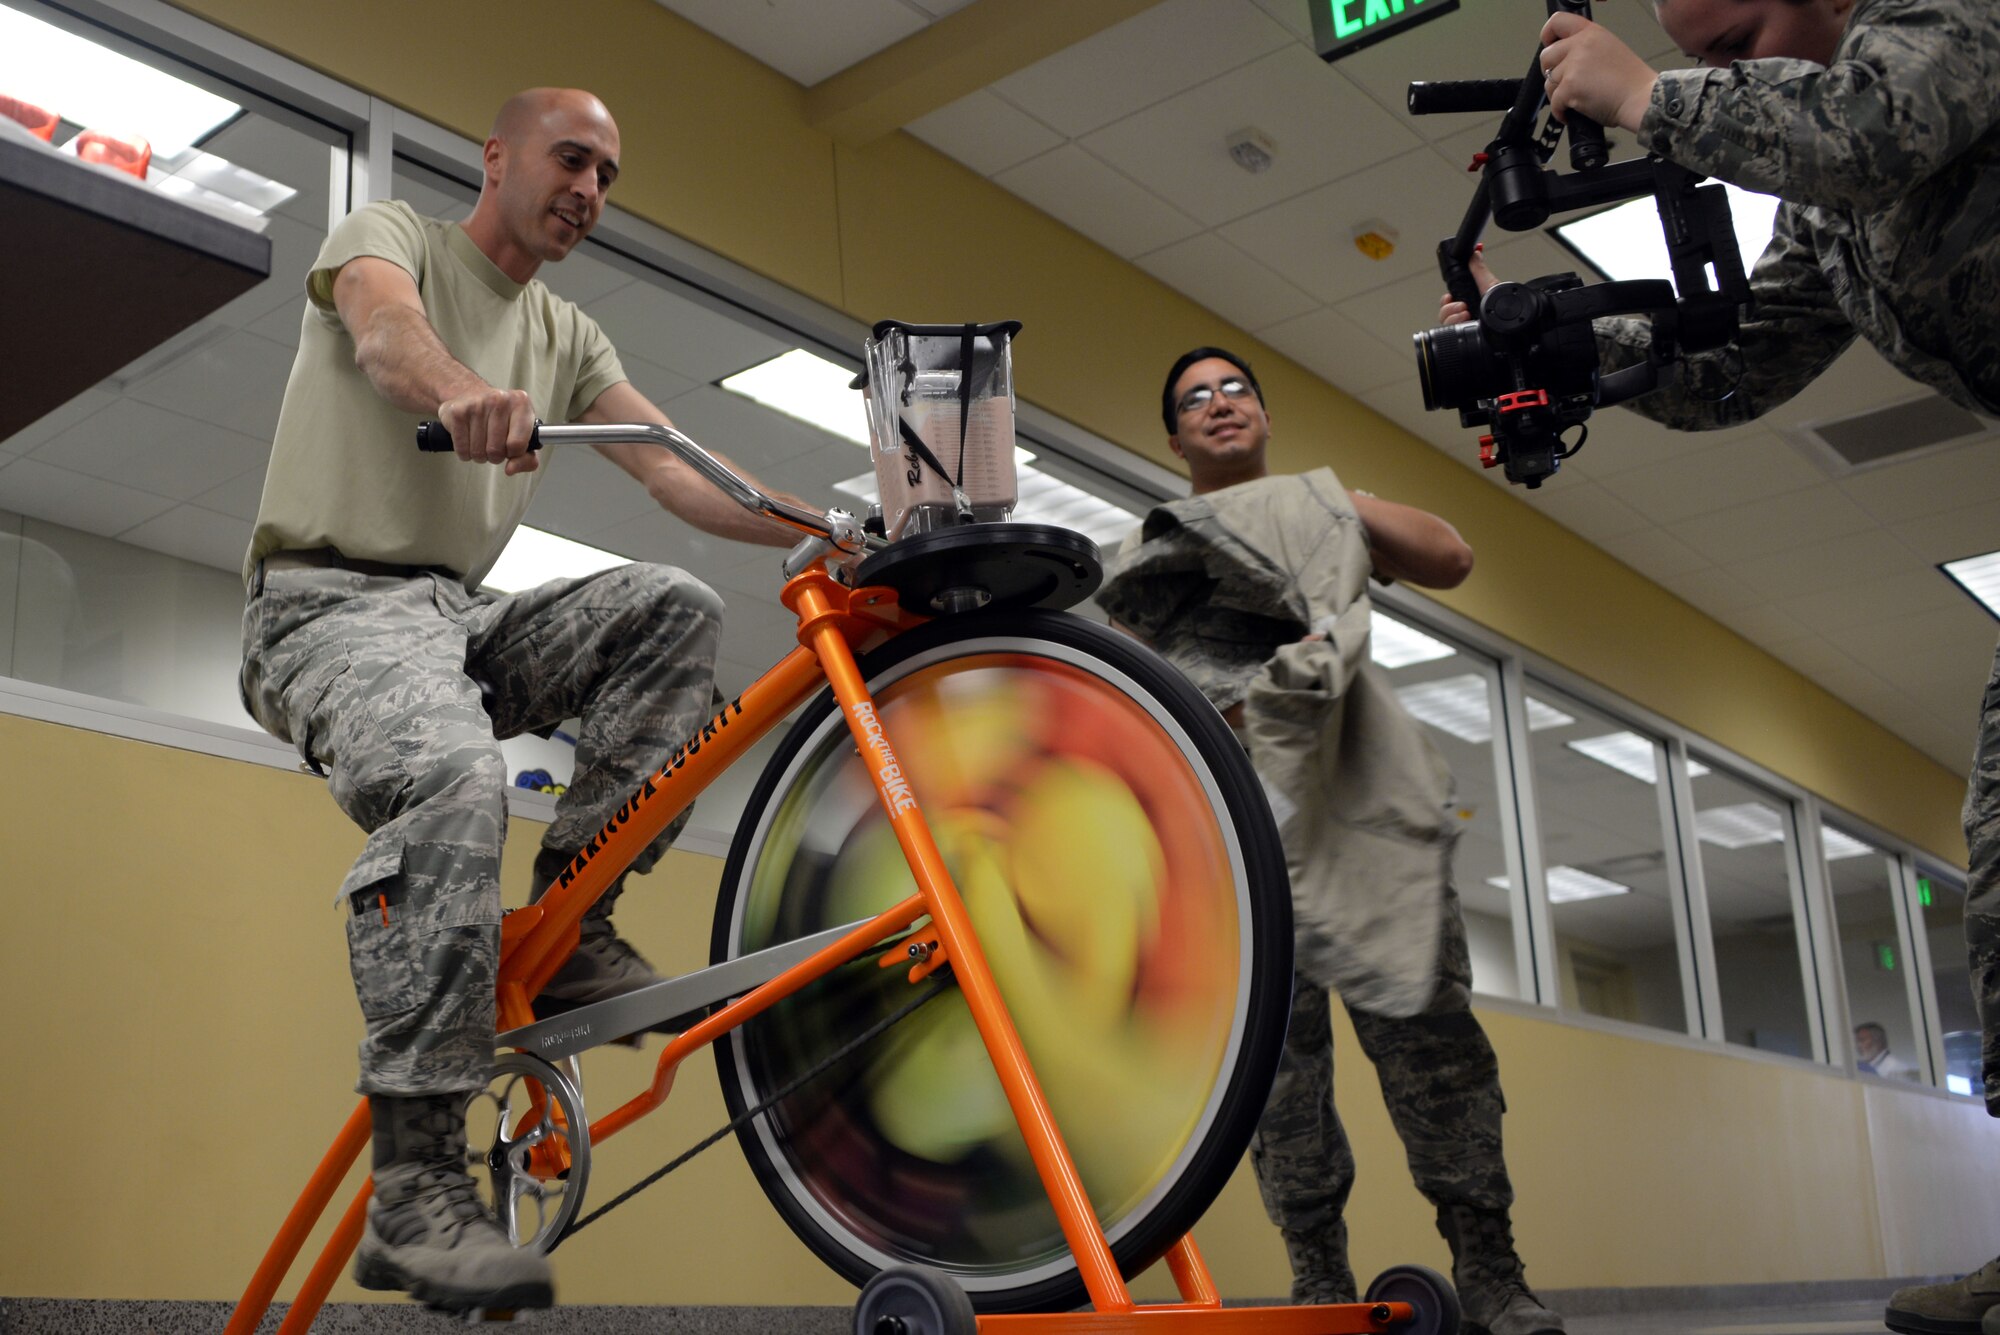 Airmen from the 62nd Aircraft Maintenance Unit participate in blending their own smoothie on a smoothie bike presented by the 56th Medical Group health promotions at Luke Air Force Base, Ariz., April 5, 2018.  The 56th MDG is celebrating National Nutrition Month by inspiring Thunderbolts to eat healthier and promoting overall wellness. (U.S. Air Force photo by Senior Airman Devante Williams)